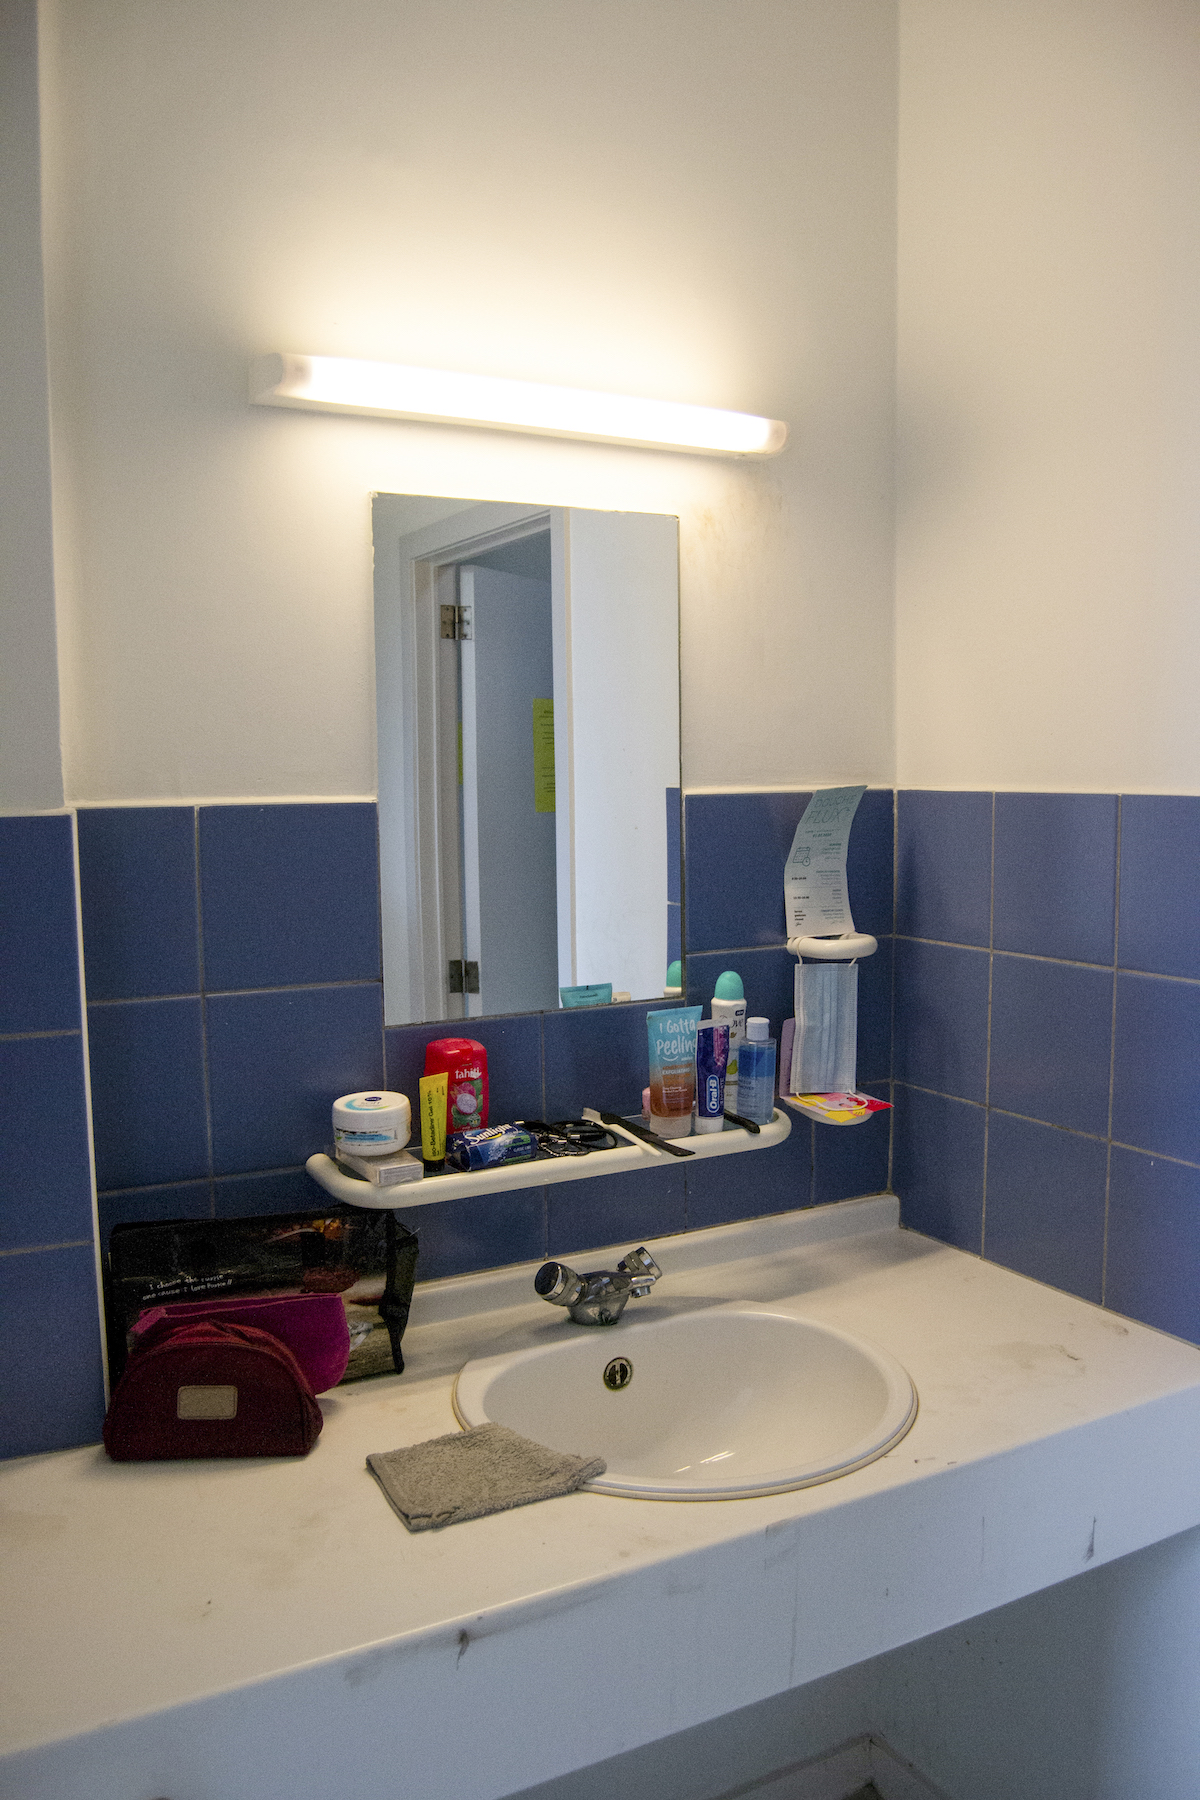 Transit, Brussels – close-up of a small sink in a room with blue tiles and a small mirror.